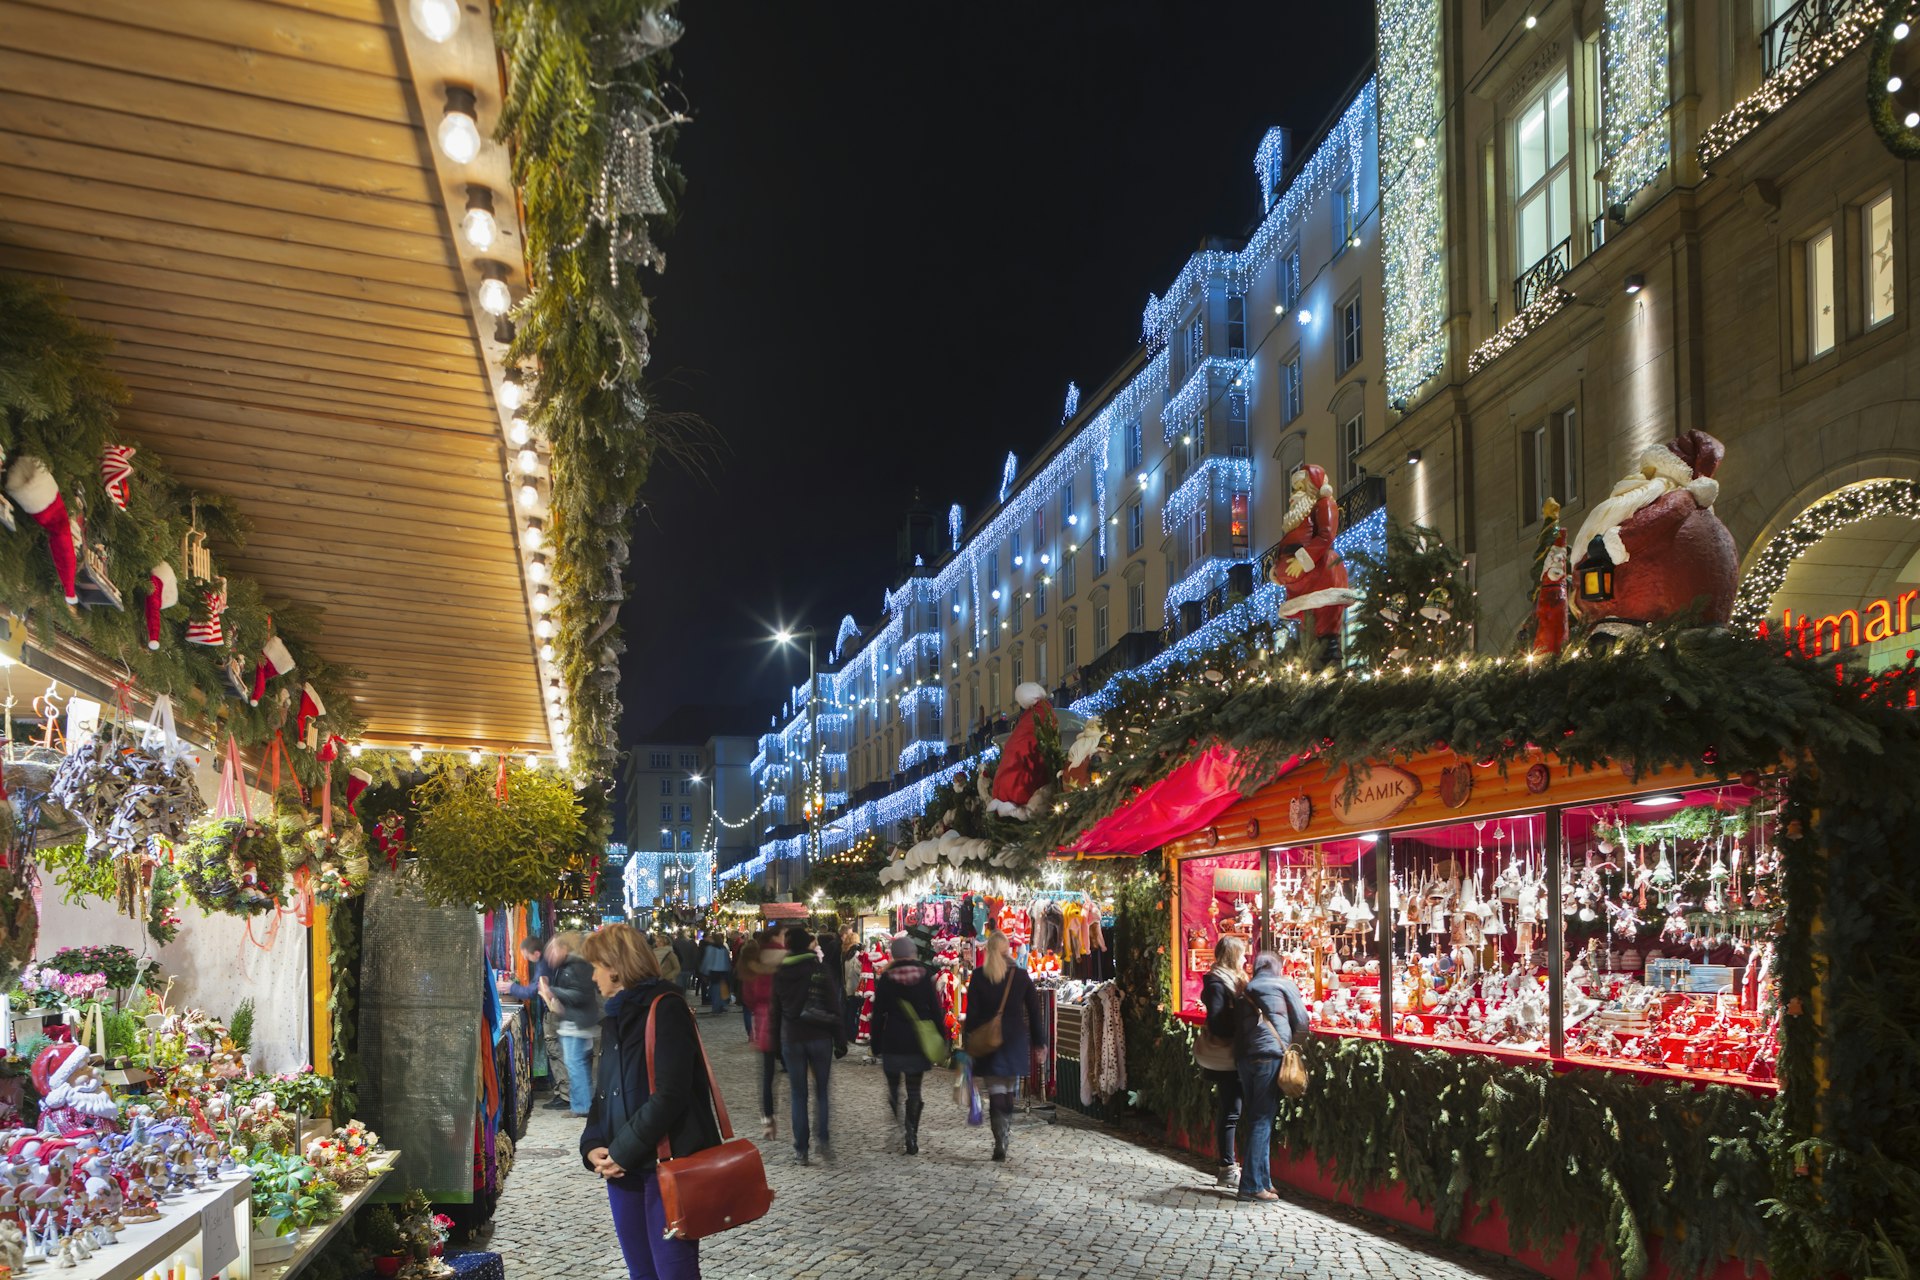 A street lined with wooden huts selling Christmas-themed items